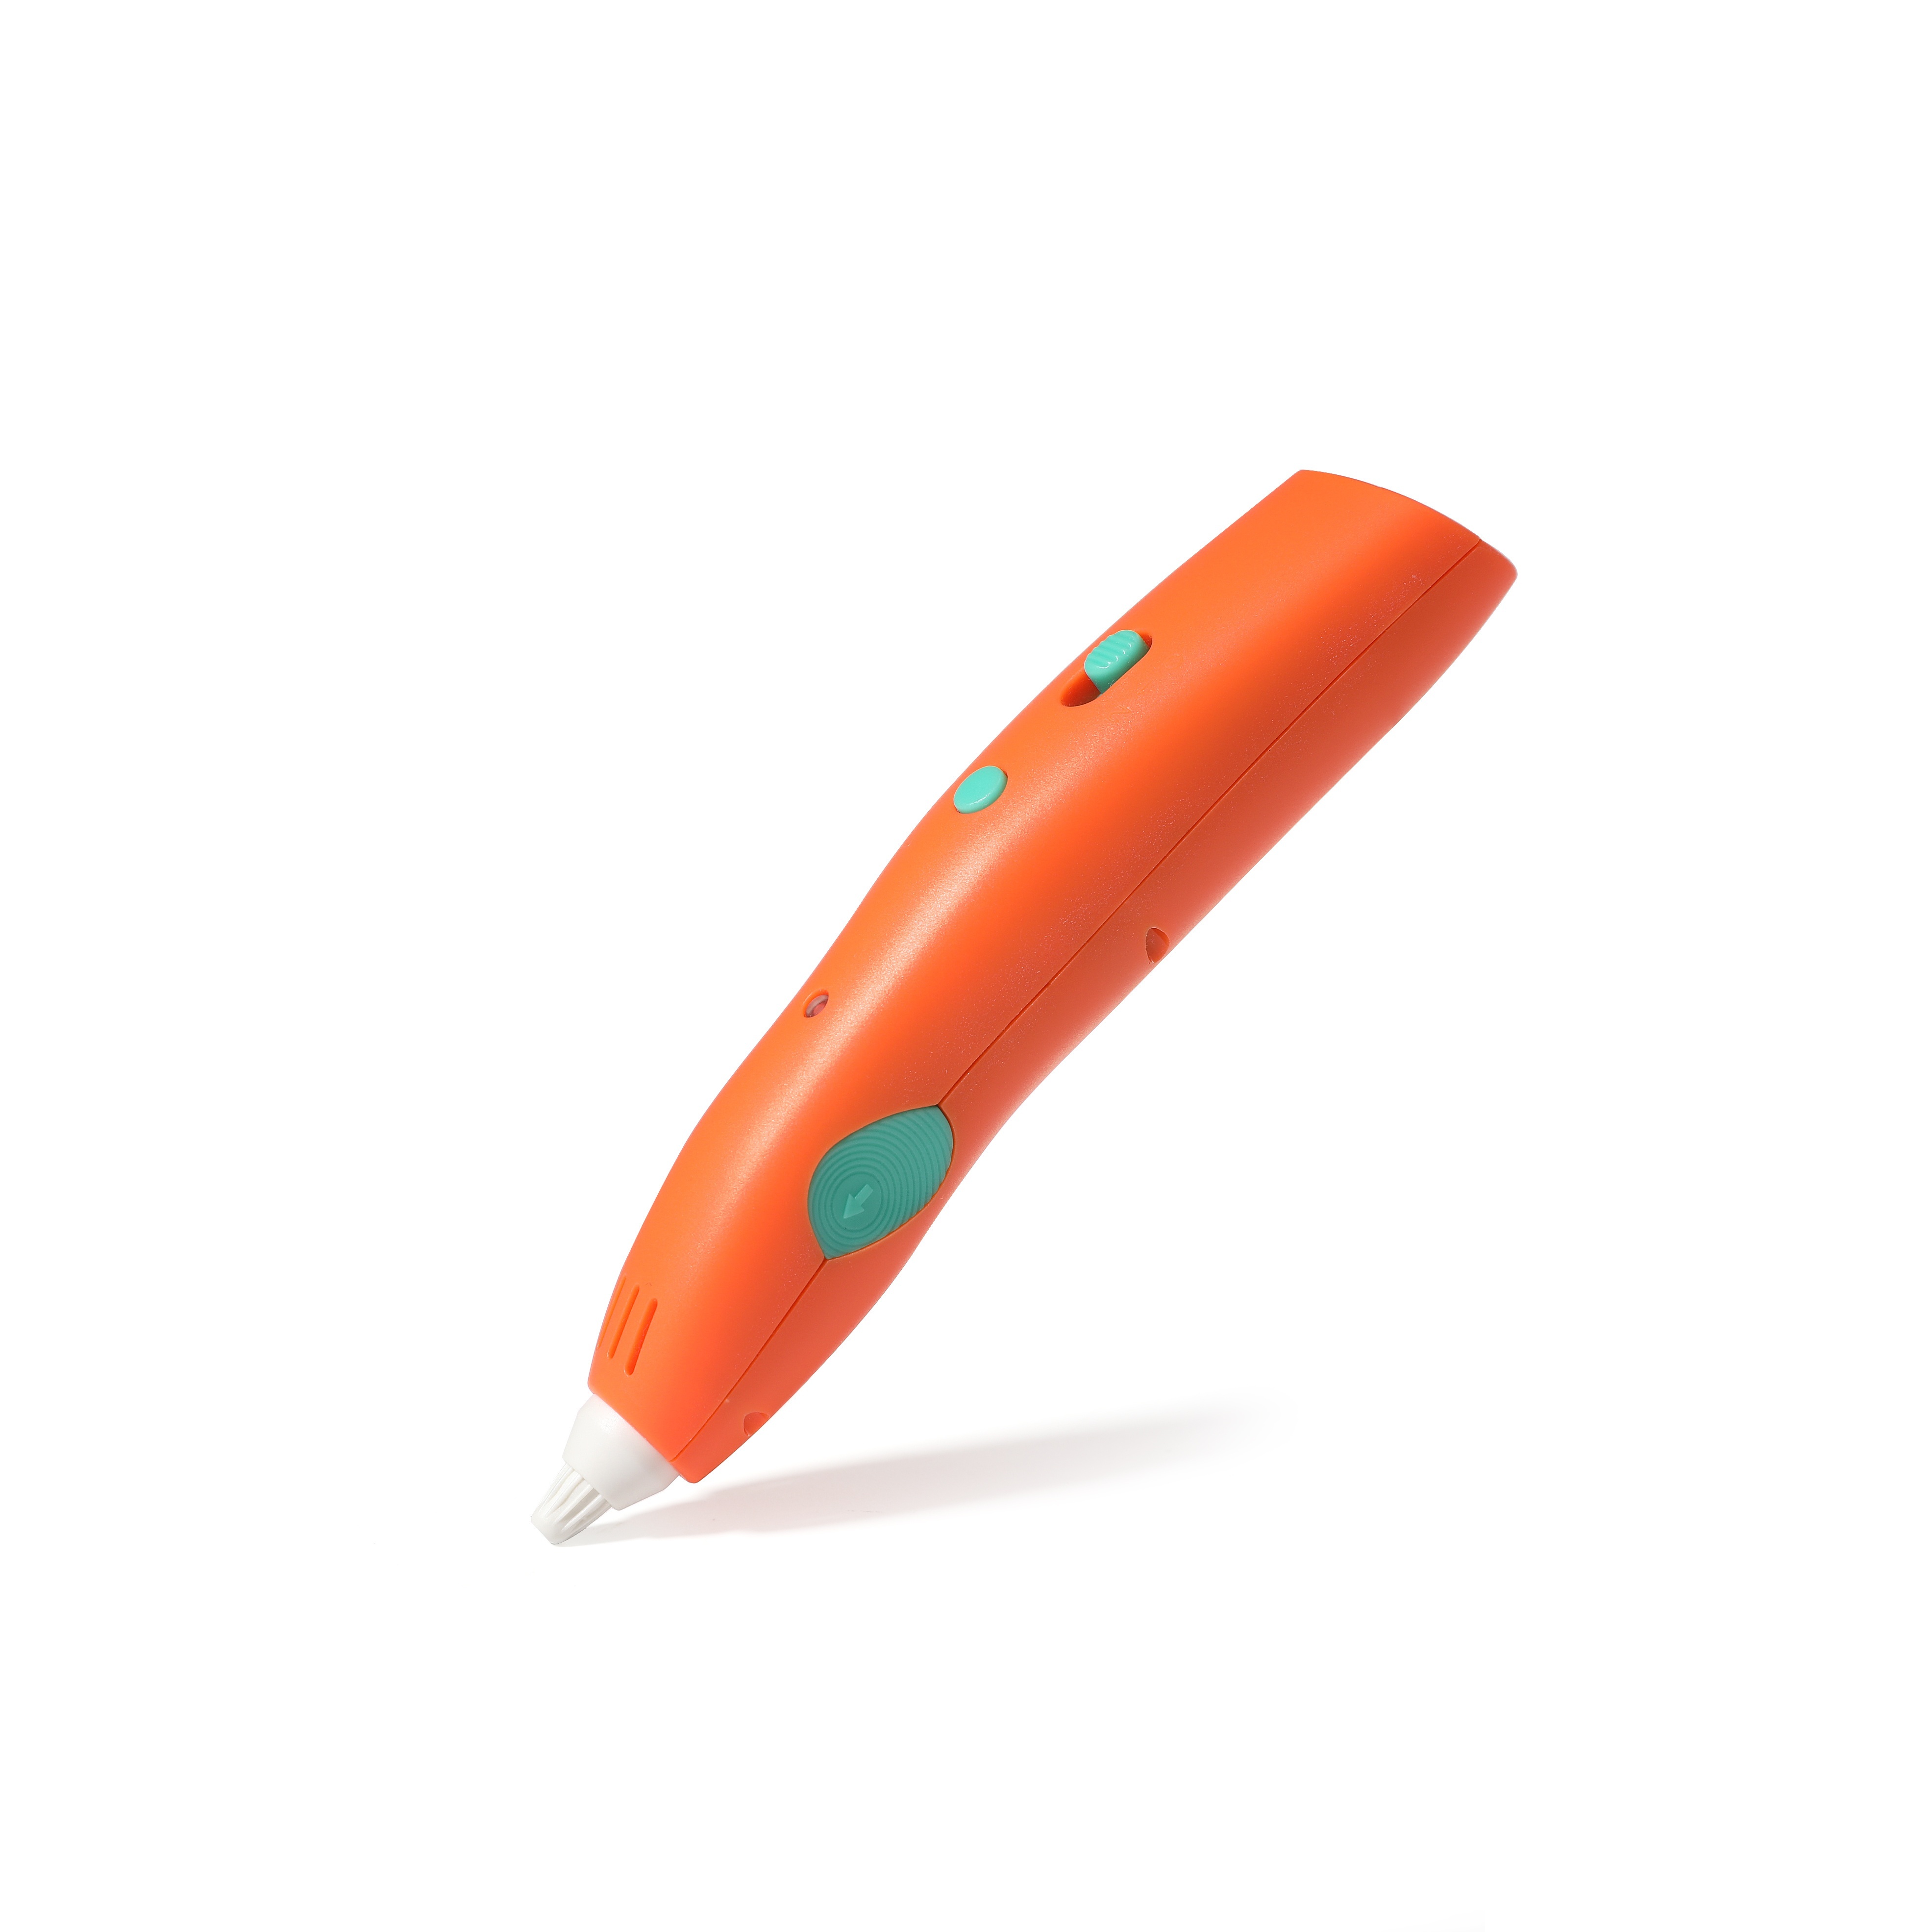 Is a 3D Printing Pen a Toy or a Serious Tool?